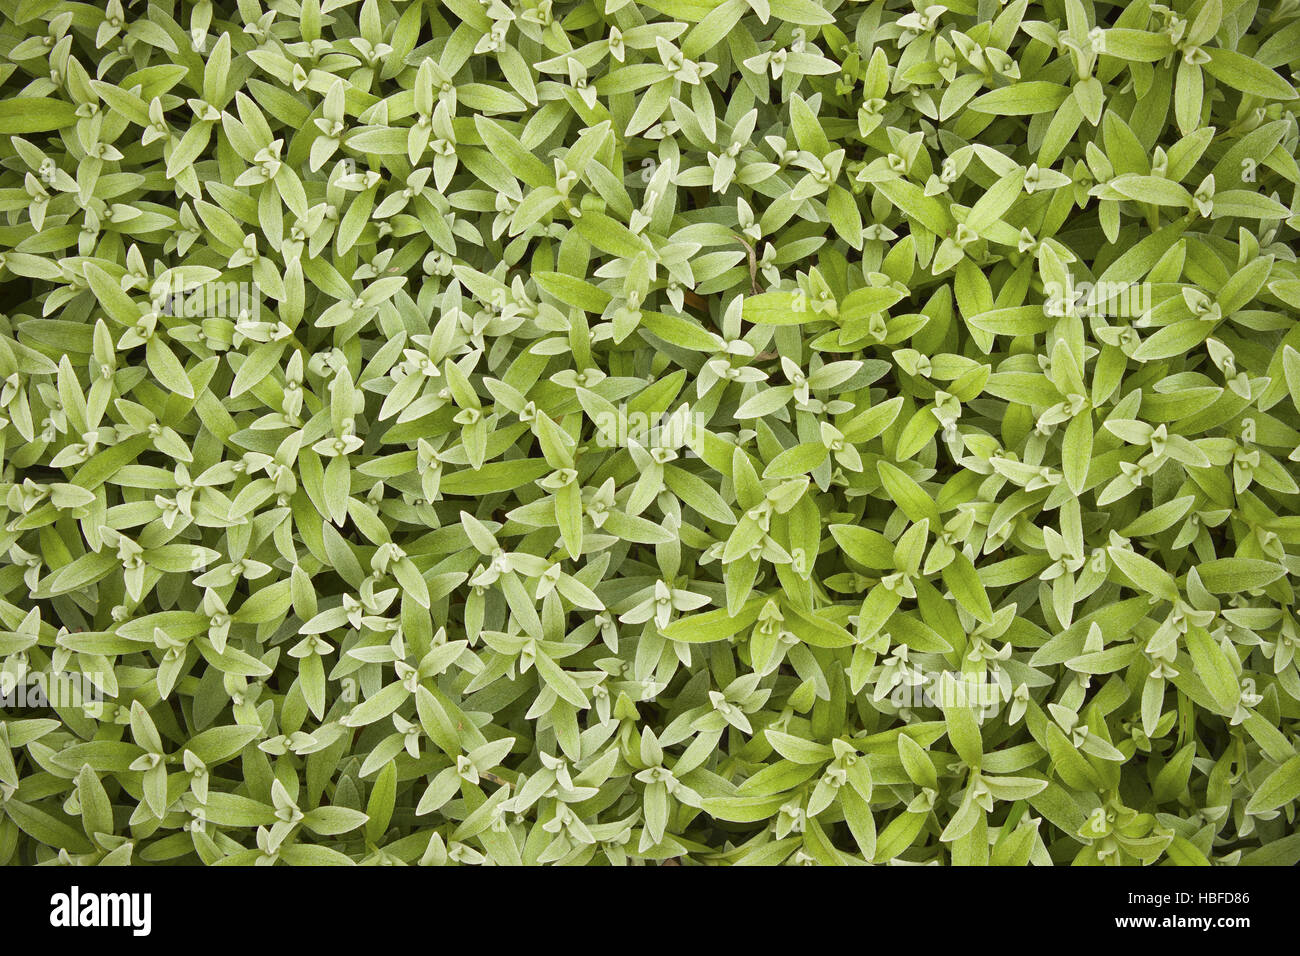 Mouse-ear chickweed (Carastium).Texture Stock Photo